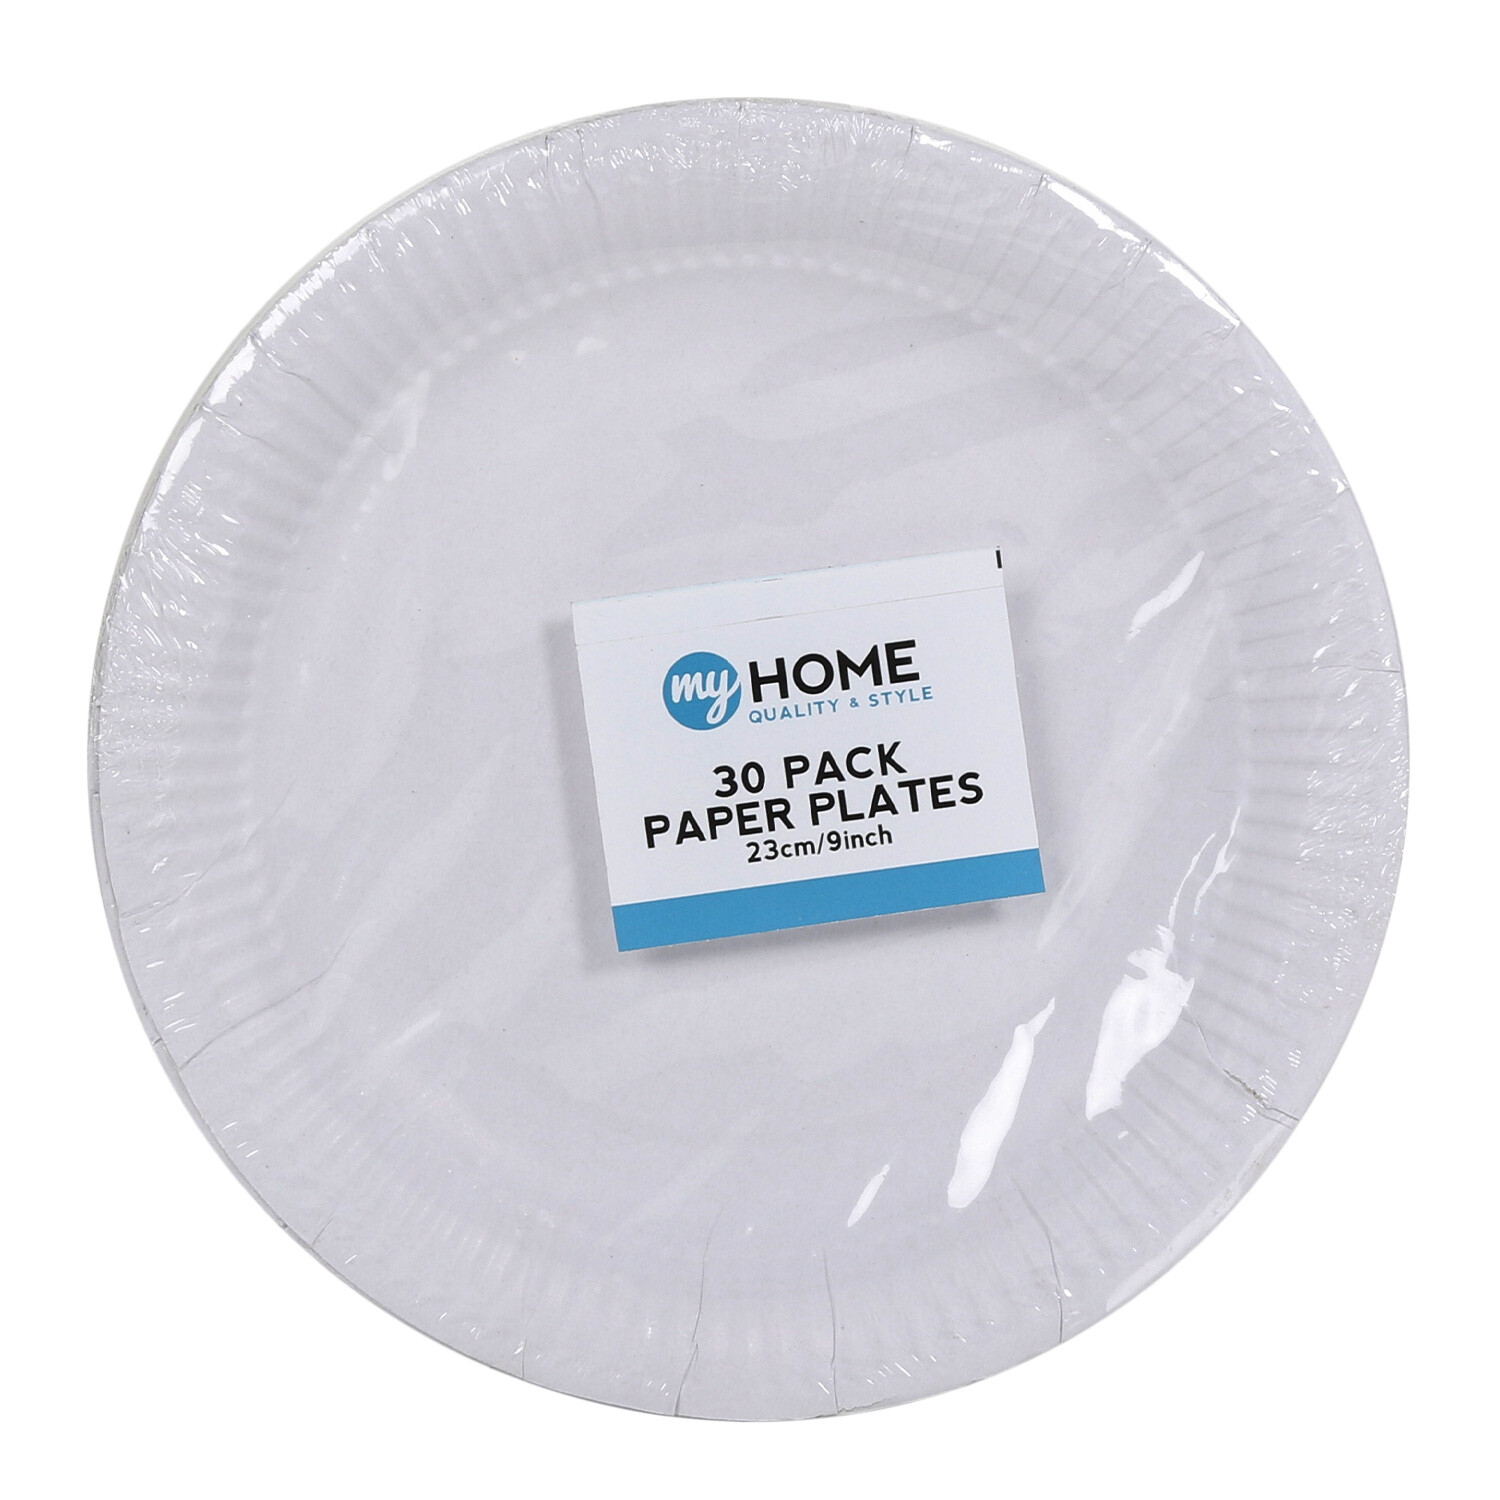 Pack of MyHome Paper Plates - White Image 1